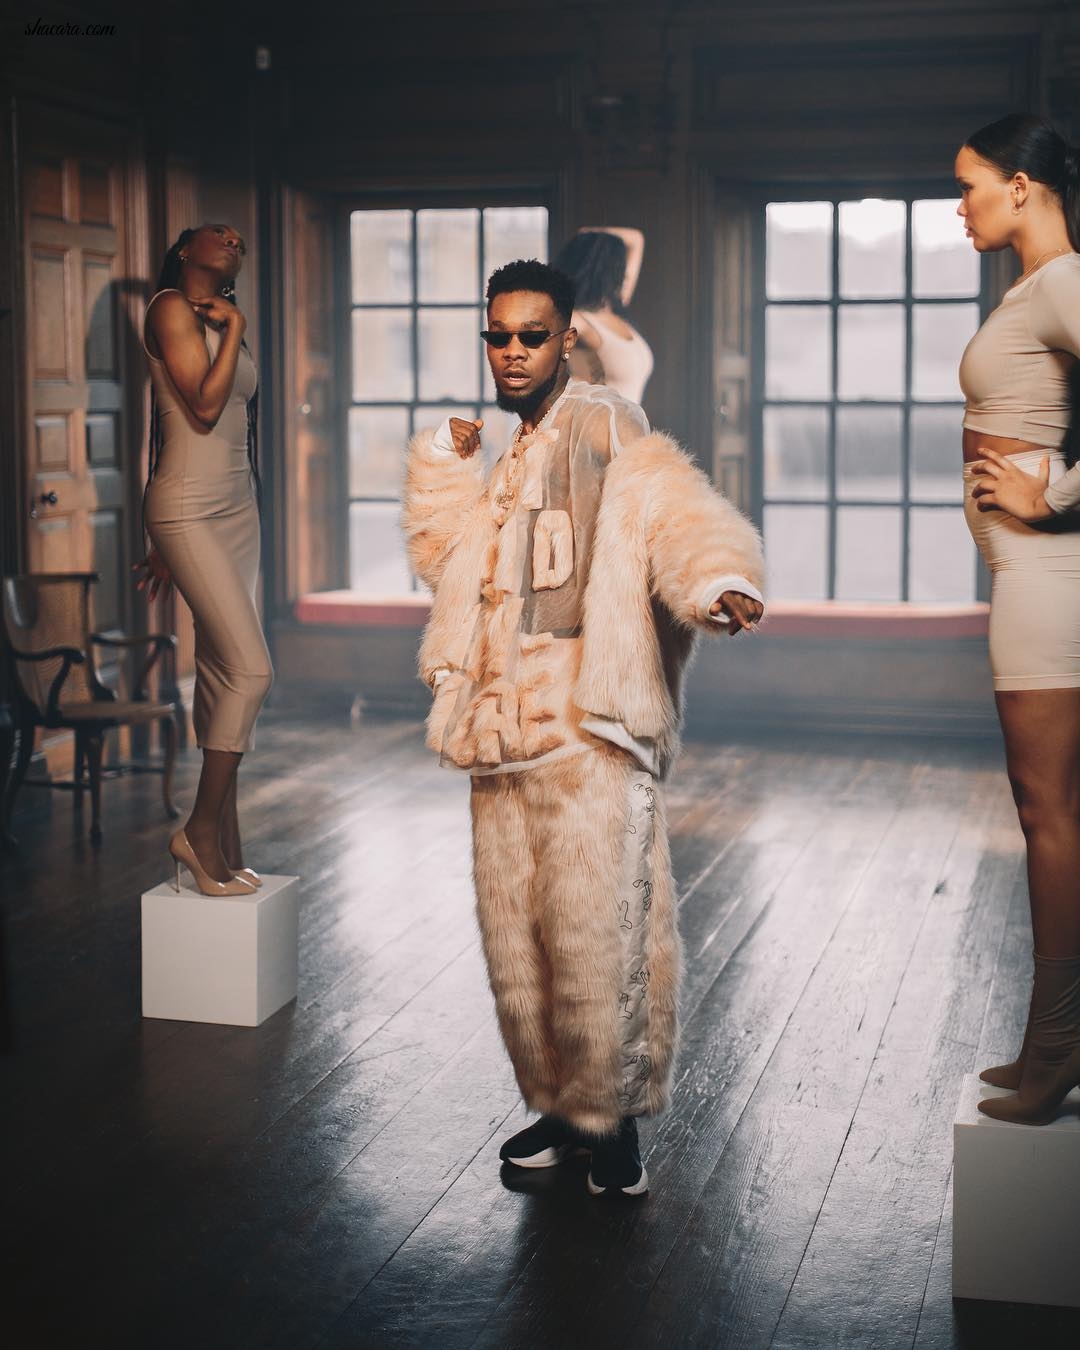 Patoranking Debuts His Coziest Look Yet In This Faux Fur Ensemble